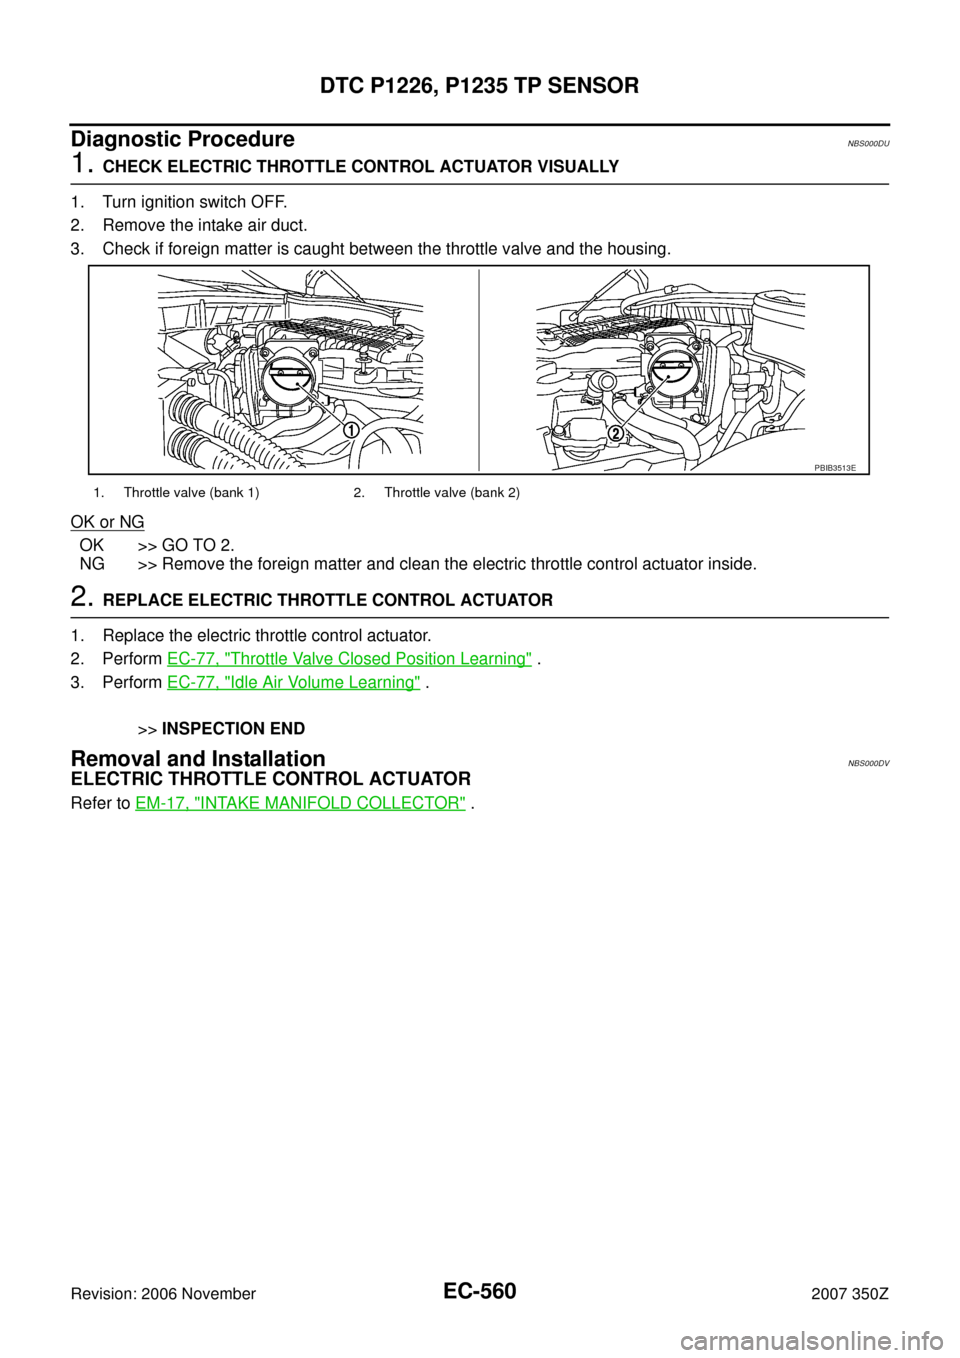 NISSAN 350Z 2007 Z33 Engine Control Workshop Manual EC-560
DTC P1226, P1235 TP SENSOR
Revision: 2006 November2007 350Z
Diagnostic ProcedureNBS000DU
1. CHECK ELECTRIC THROTTLE CONTROL ACTUATOR VISUALLY
1. Turn ignition switch OFF.
2. Remove the intake a